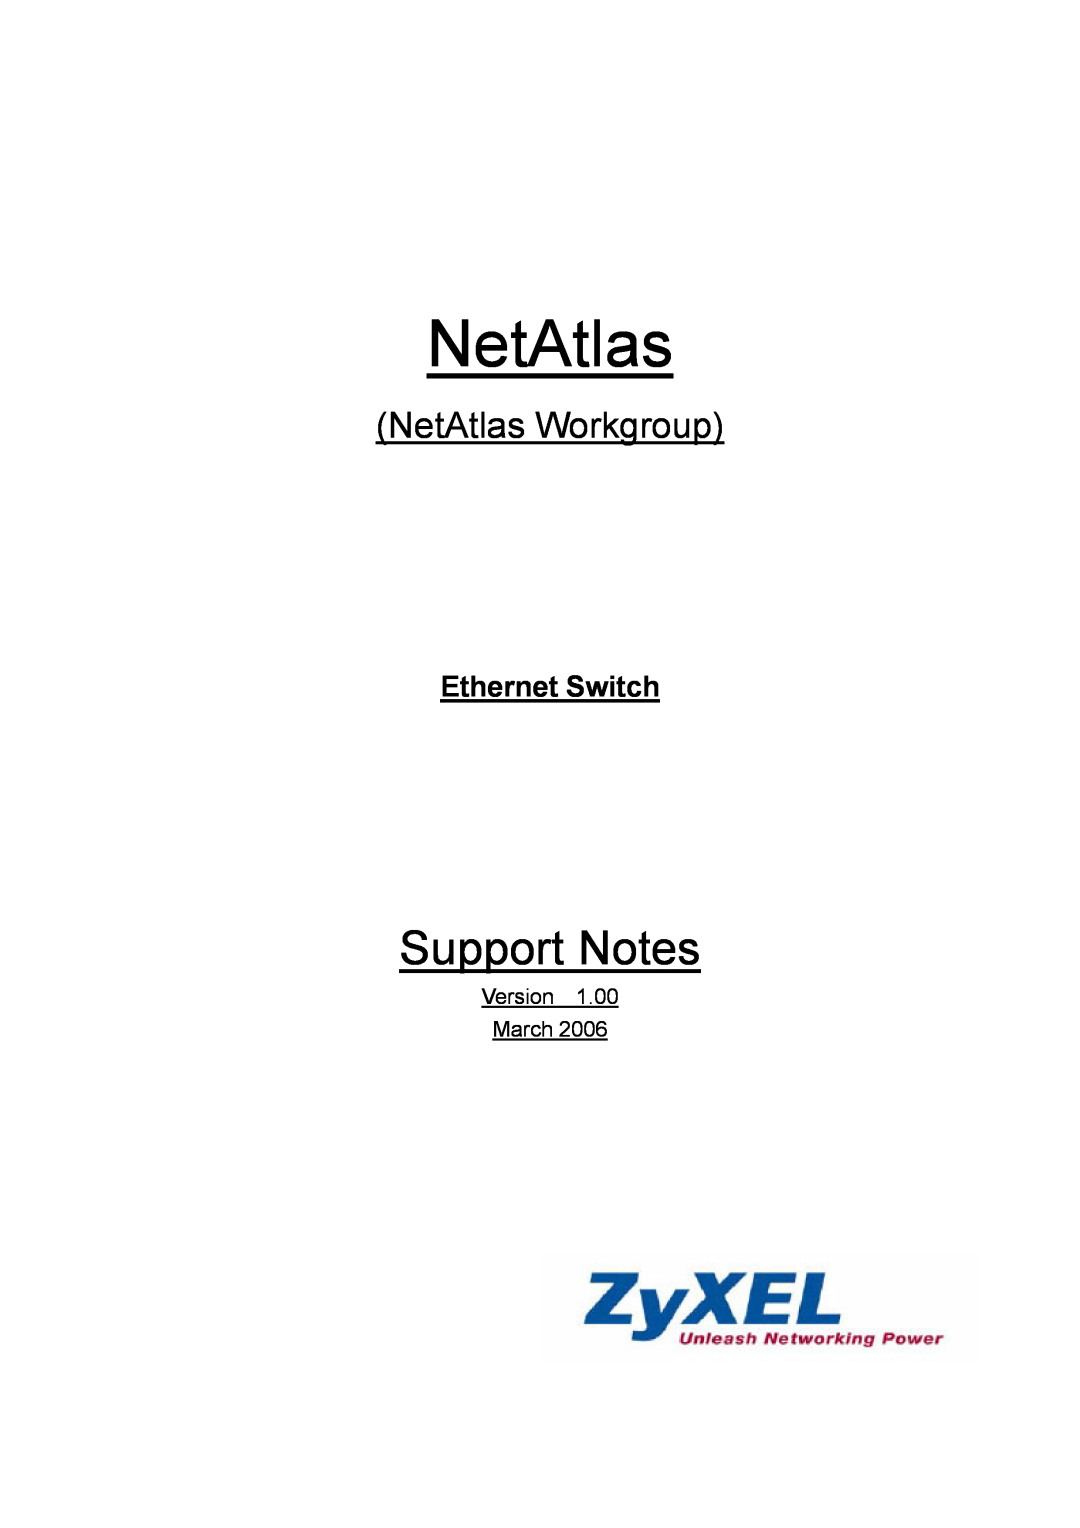 ZyXEL Communications 1 manual Ethernet Switch, Support Notes, NetAtlas Workgroup 